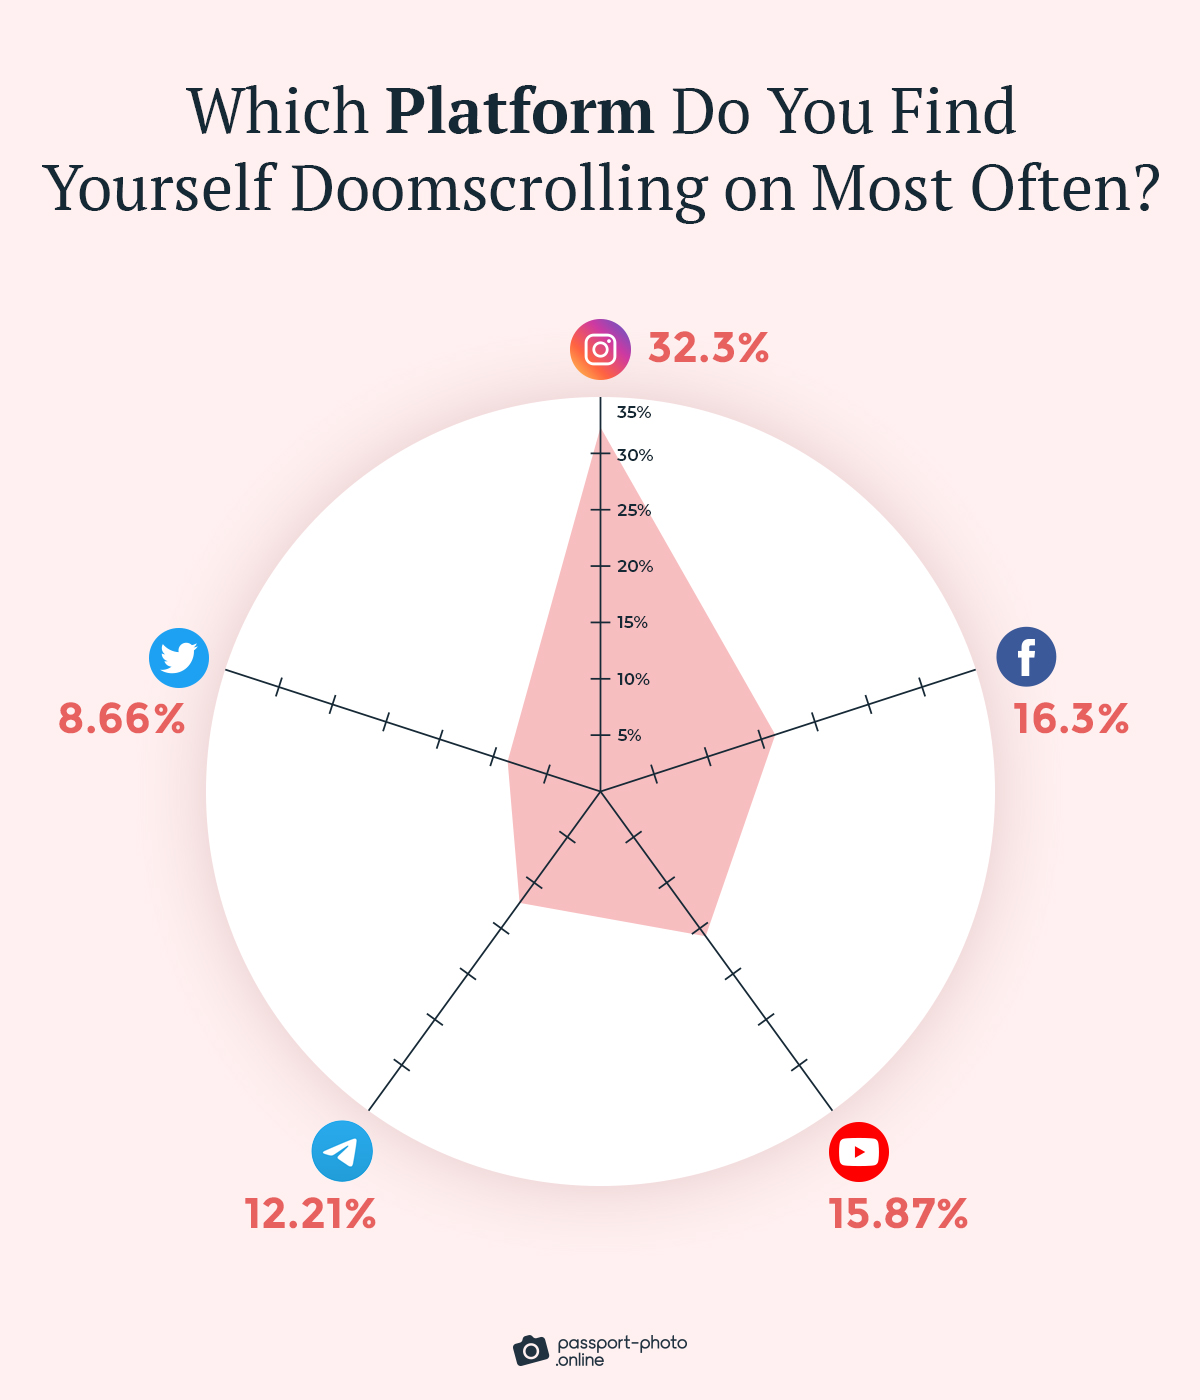 Instagram turned out to be the most popular platform for doomscrolling with 32% of the vote